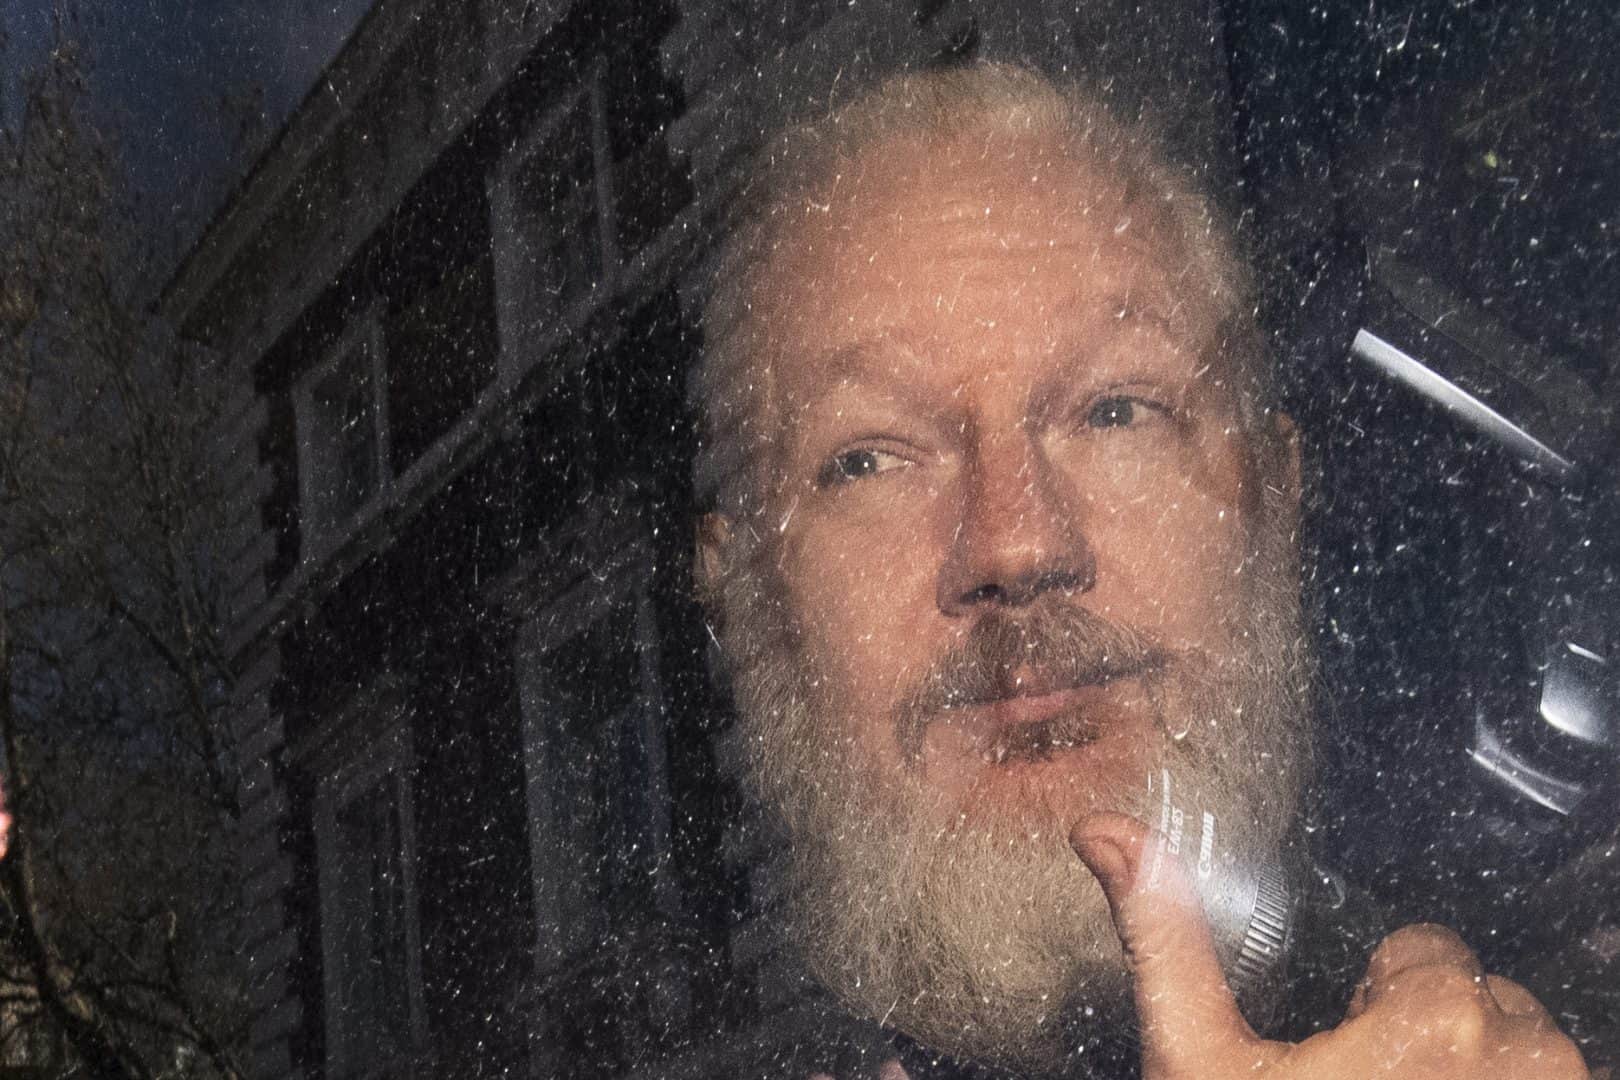 Doctors call for end to ‘torture and medical neglect of Julian Assange’